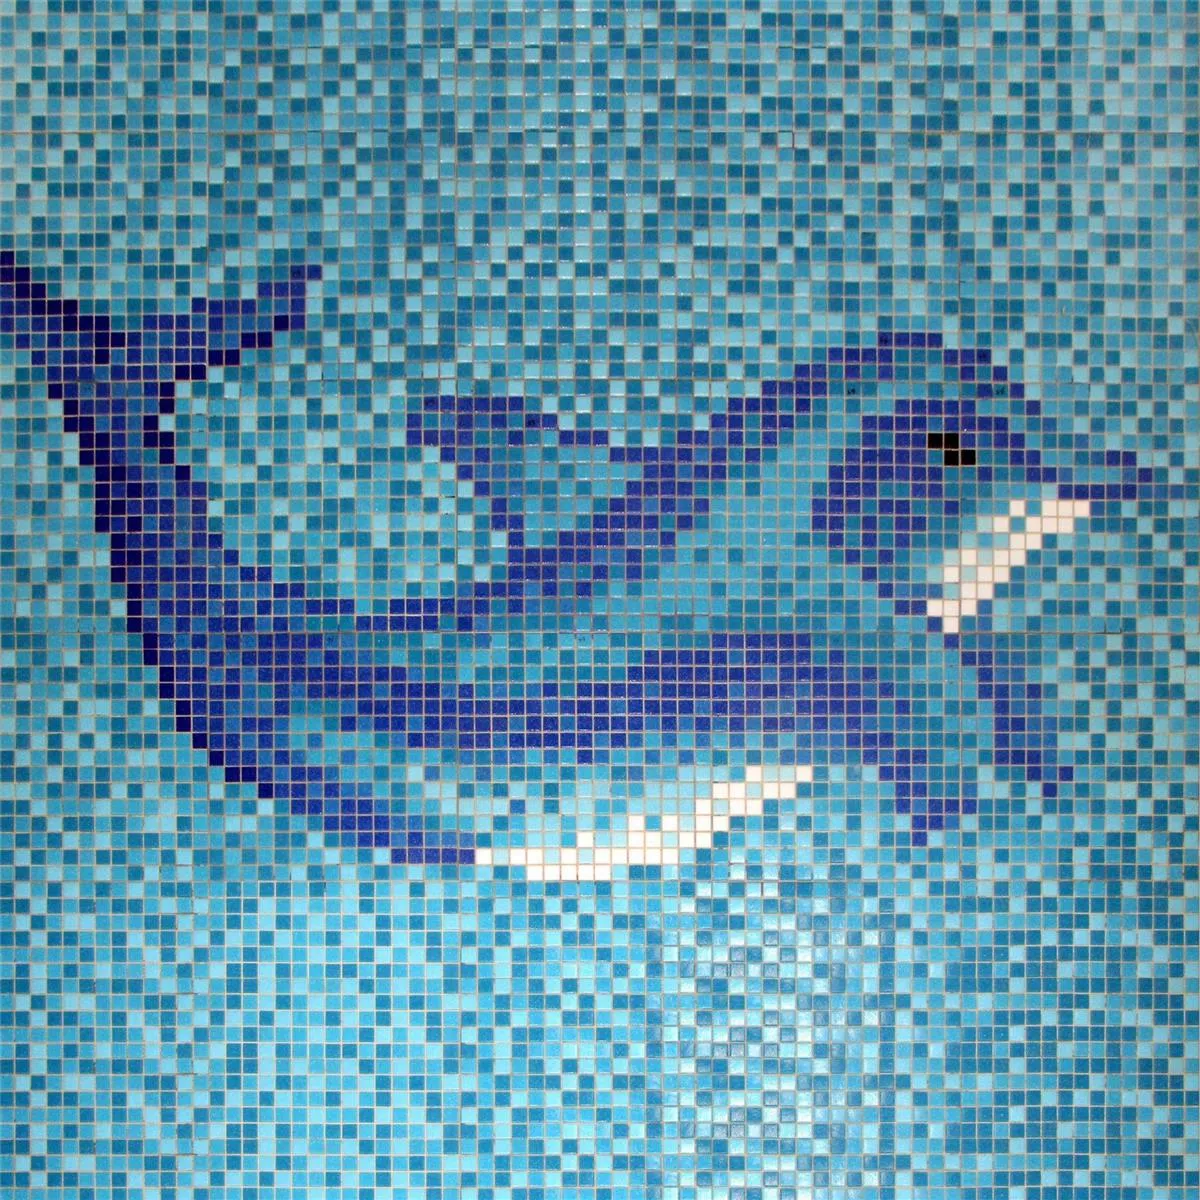 Swimming Pool Mosaic Delphin Pasted on Paper